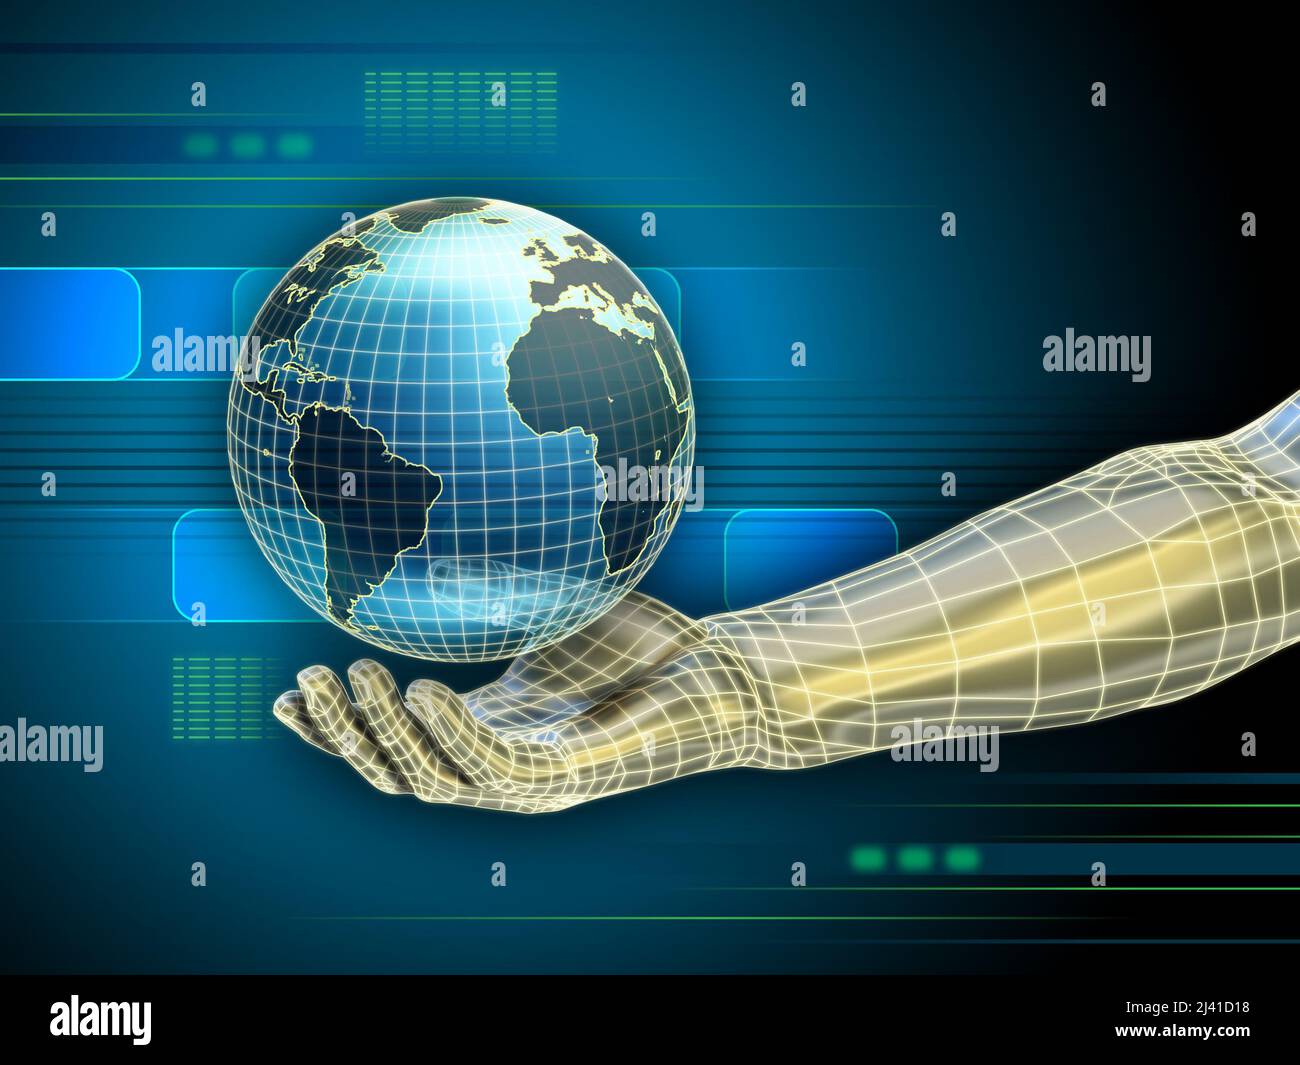 Android hand holding a 3D model of the Earth. Digital illustration. Stock Photo